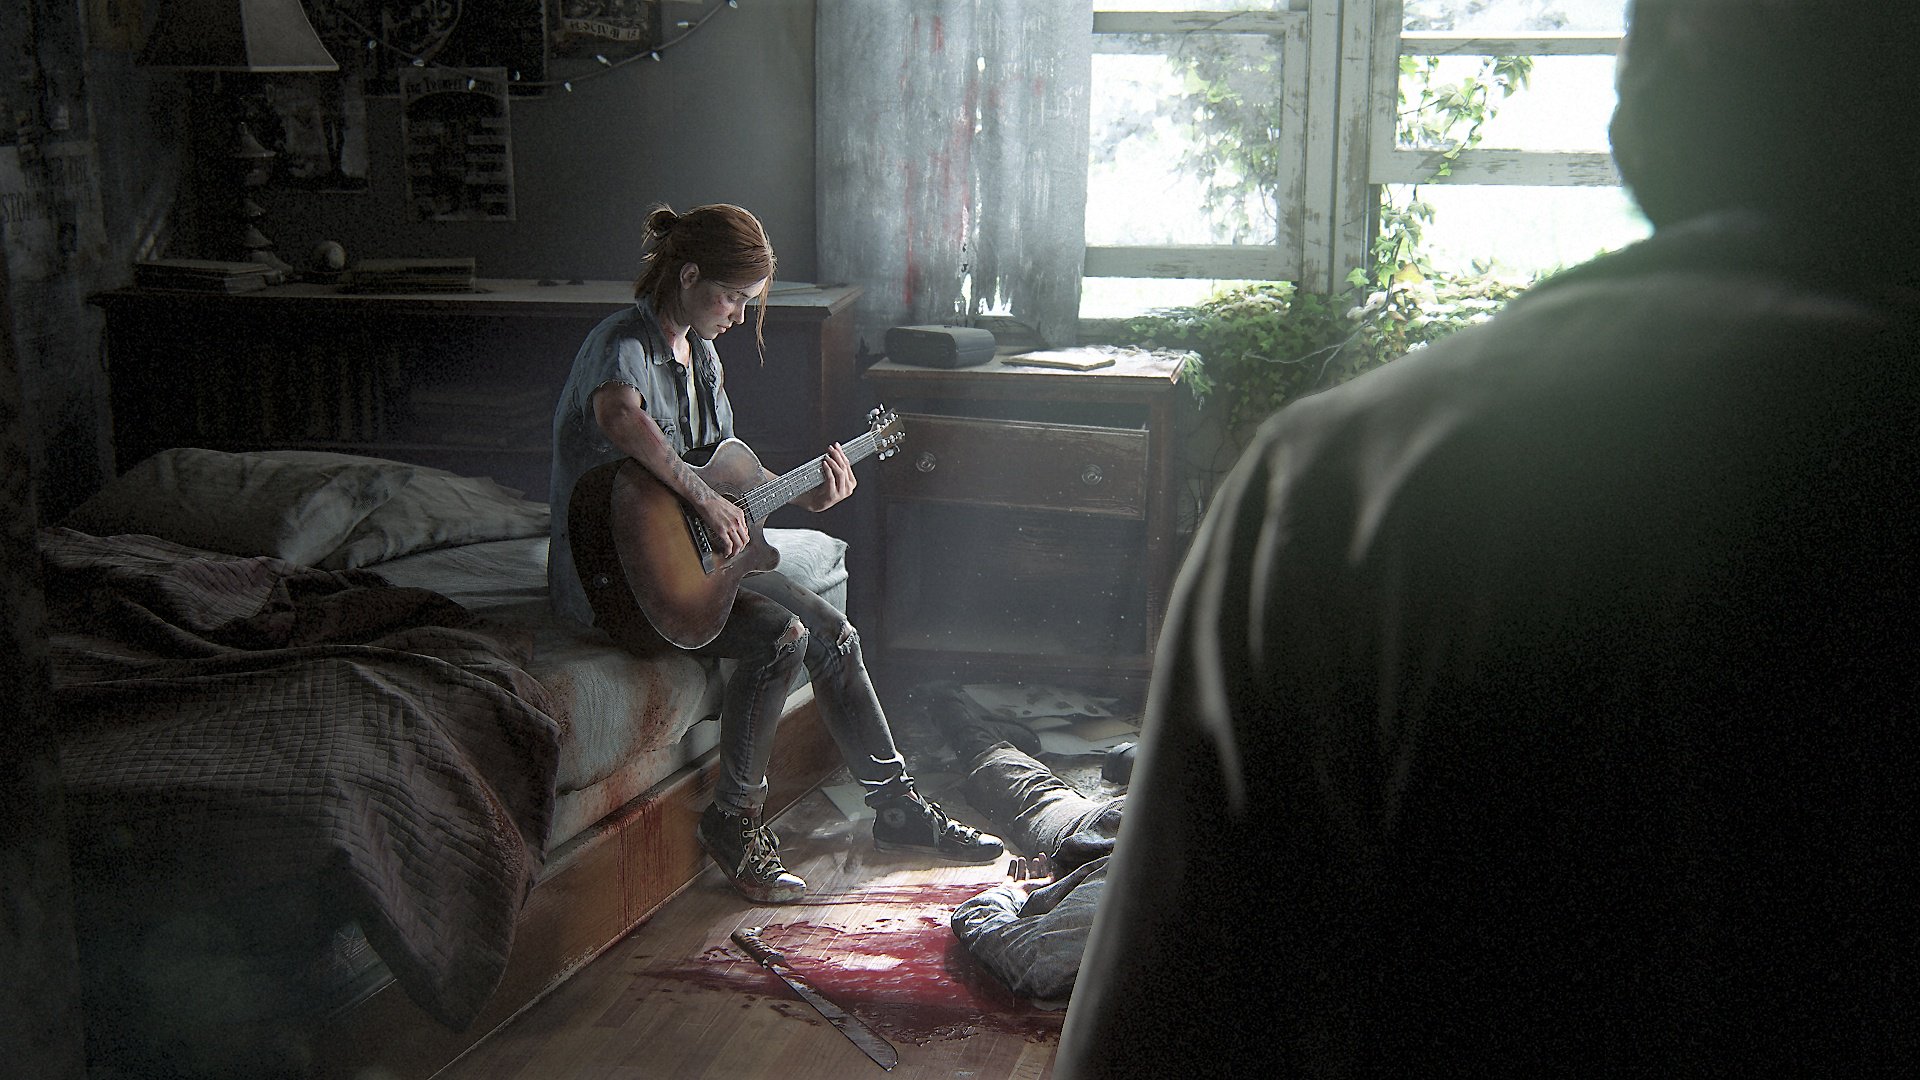 The Last of Us Part II to Release in February 2020 with Four